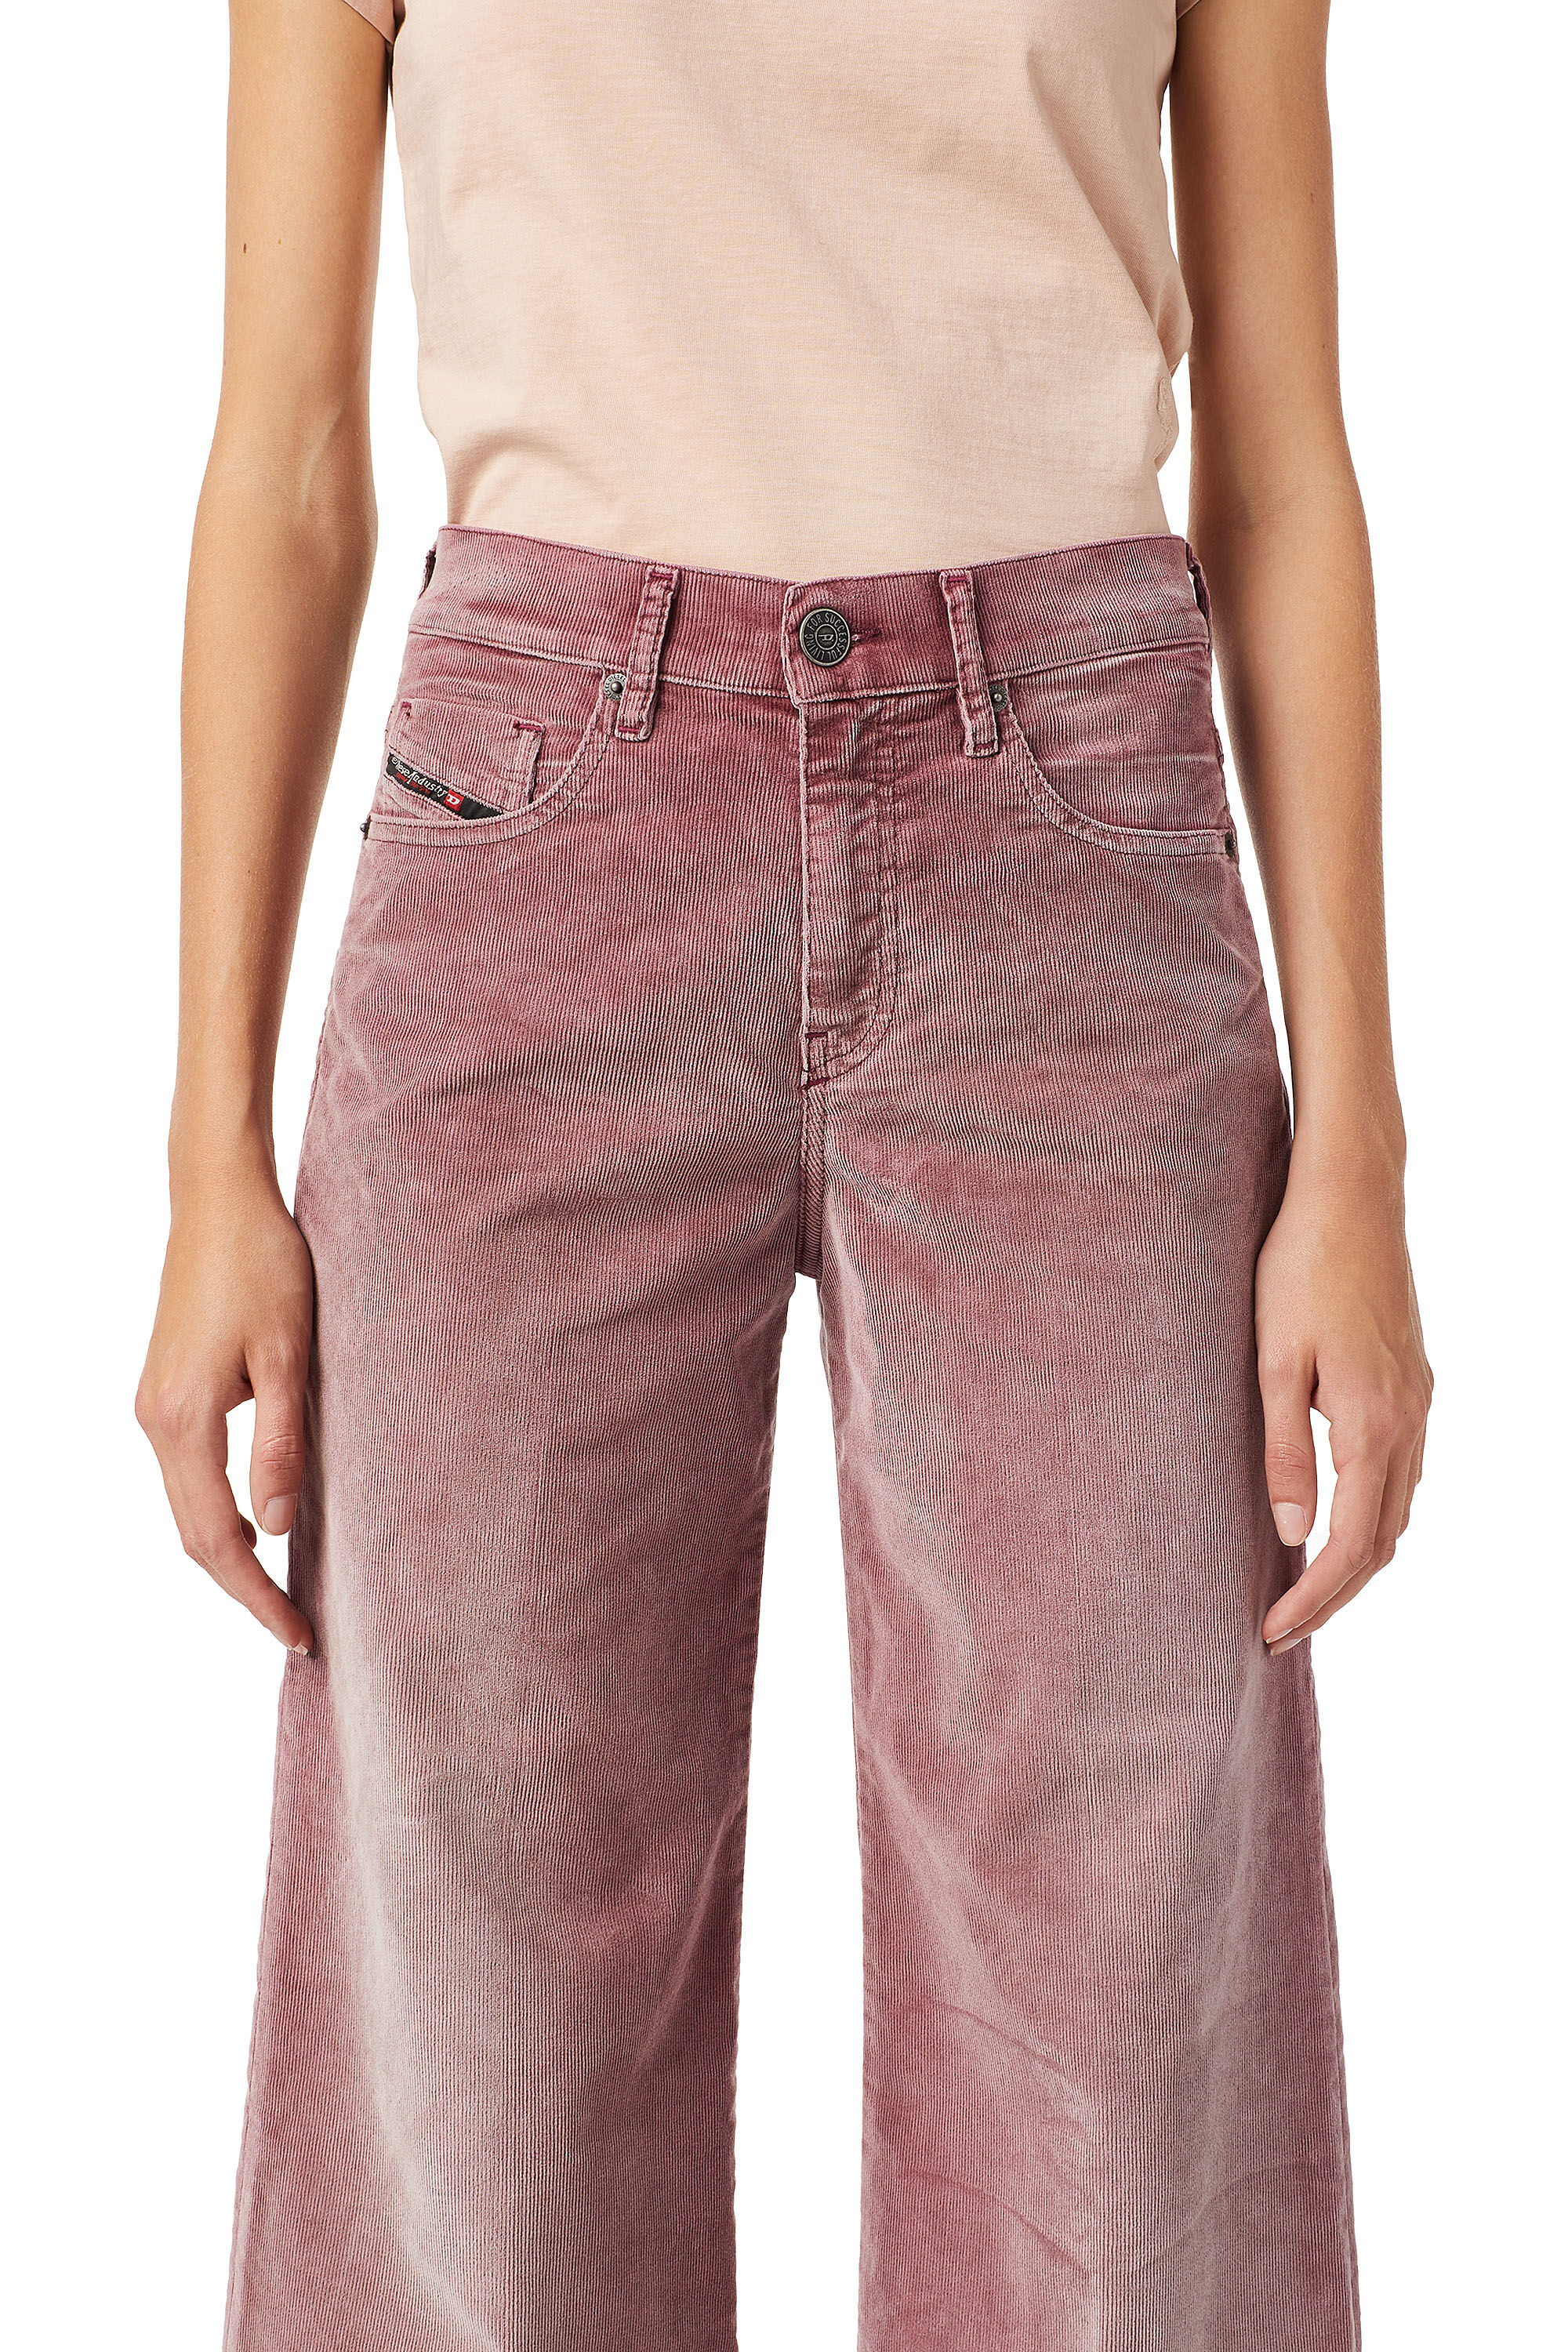 Diesel - D-Akemi 069YA Bootcut and Flare Jeans,  - Image 4